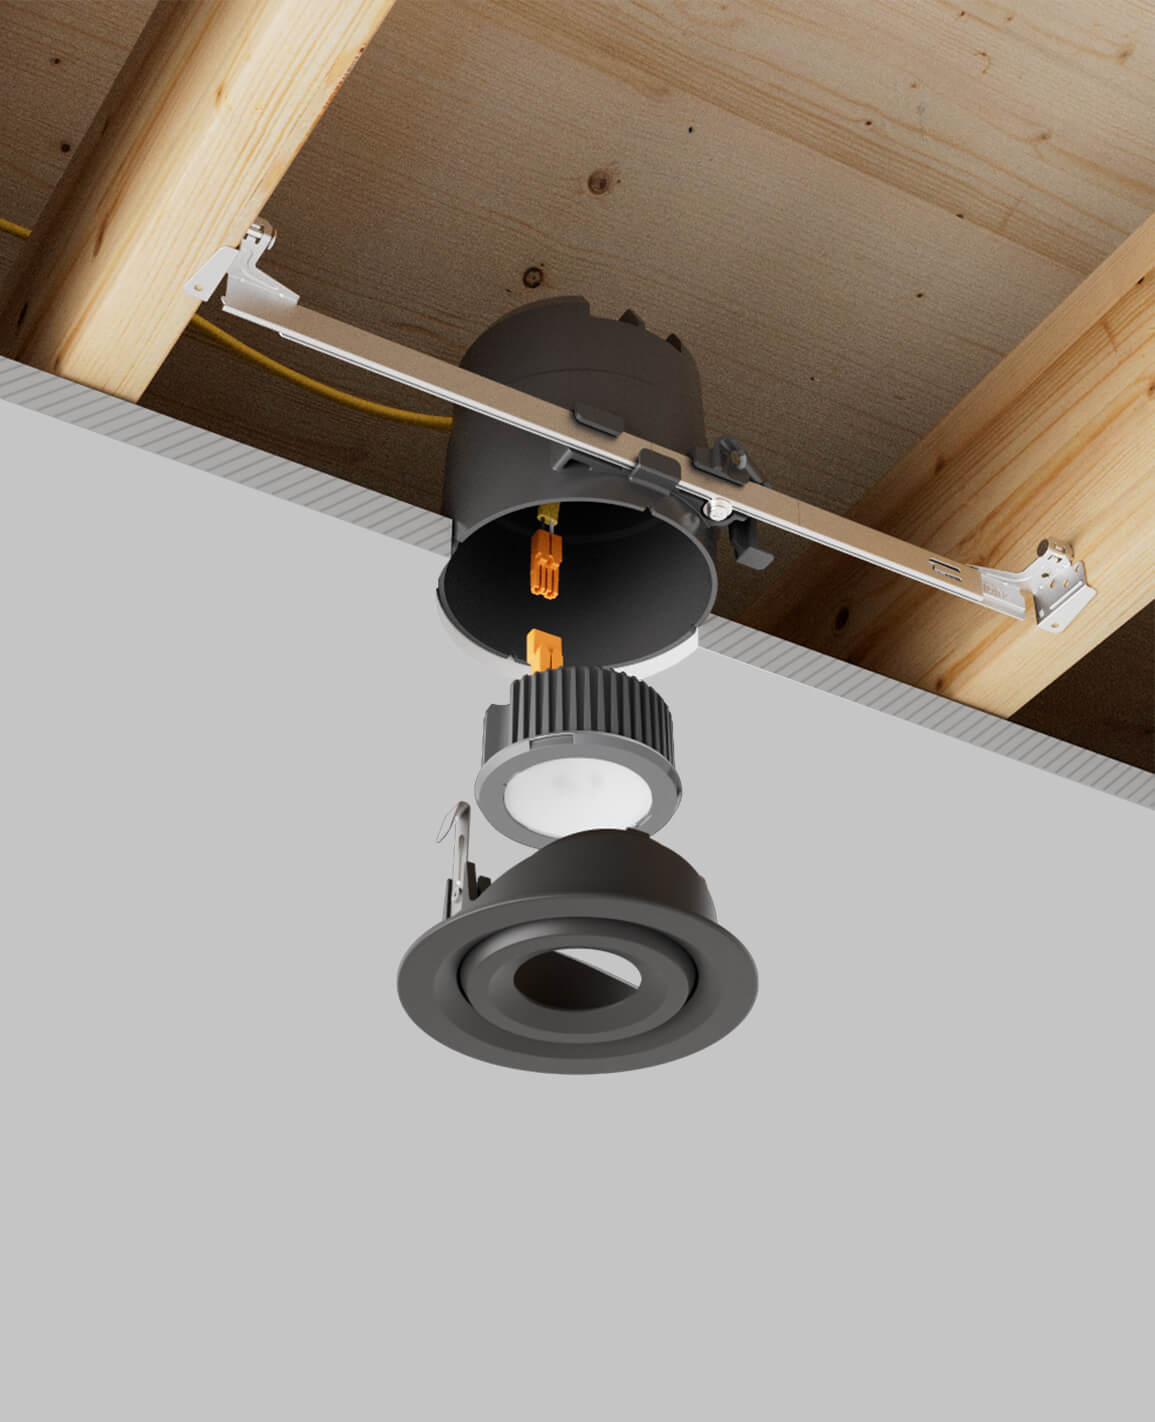 LUSA 4" recessed light with bar hangers housing and adjustable black trim